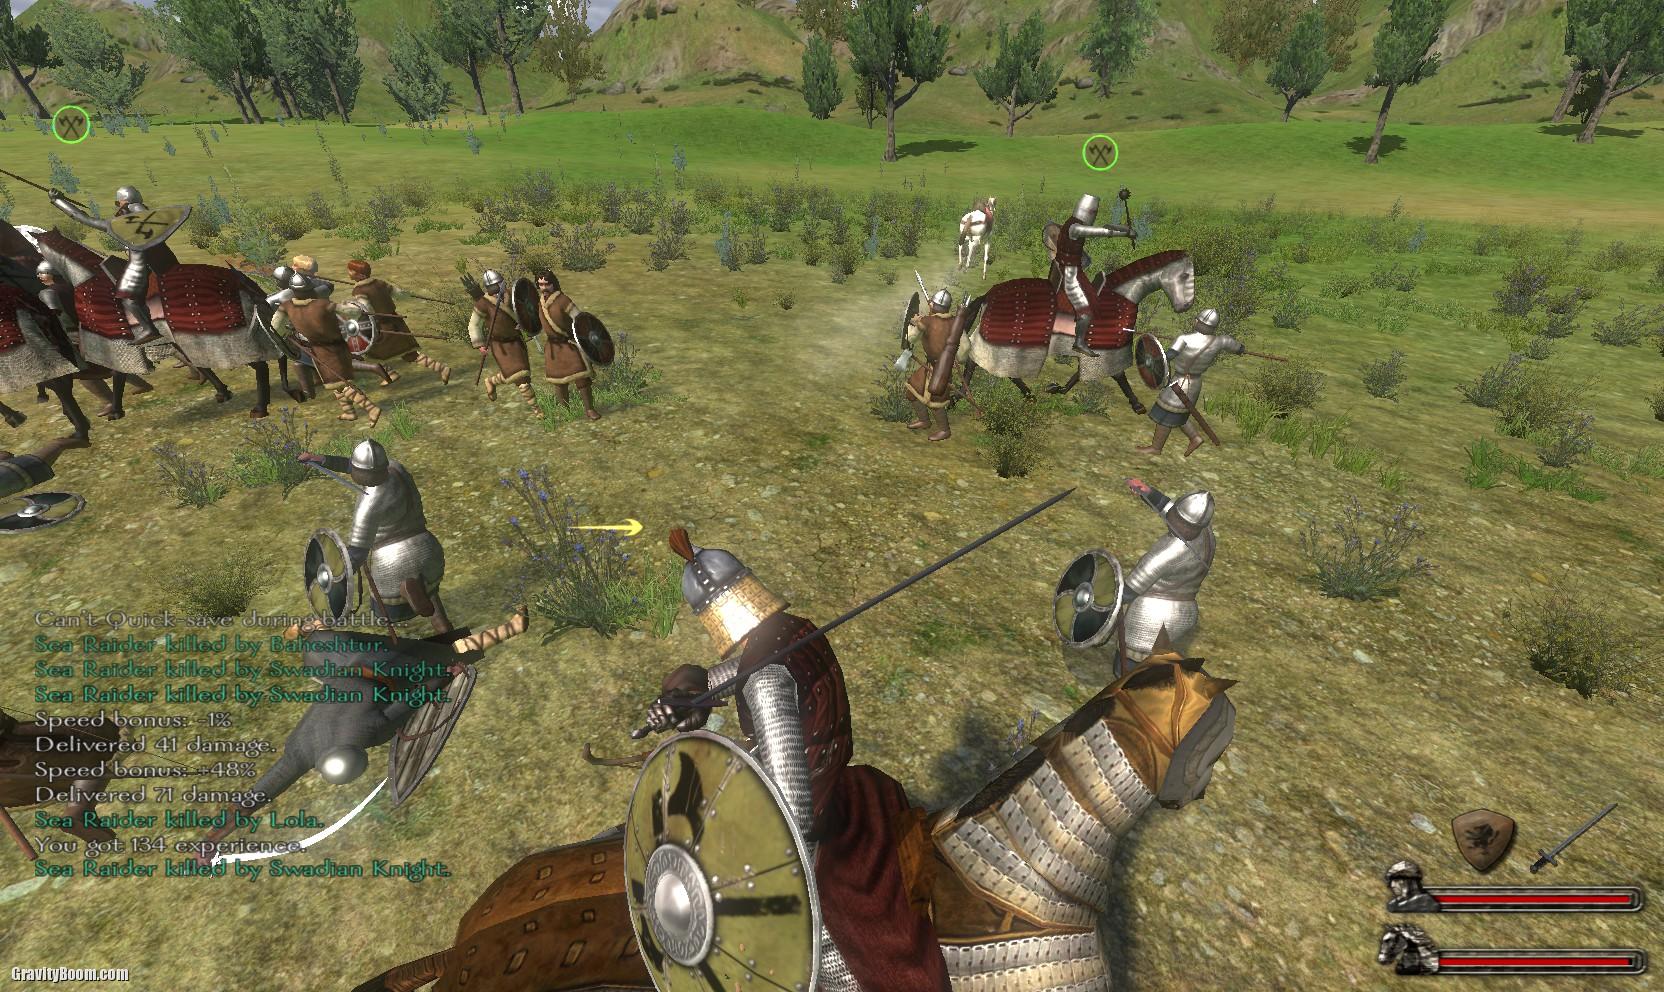 mount and blade medieval conquest slow loading times